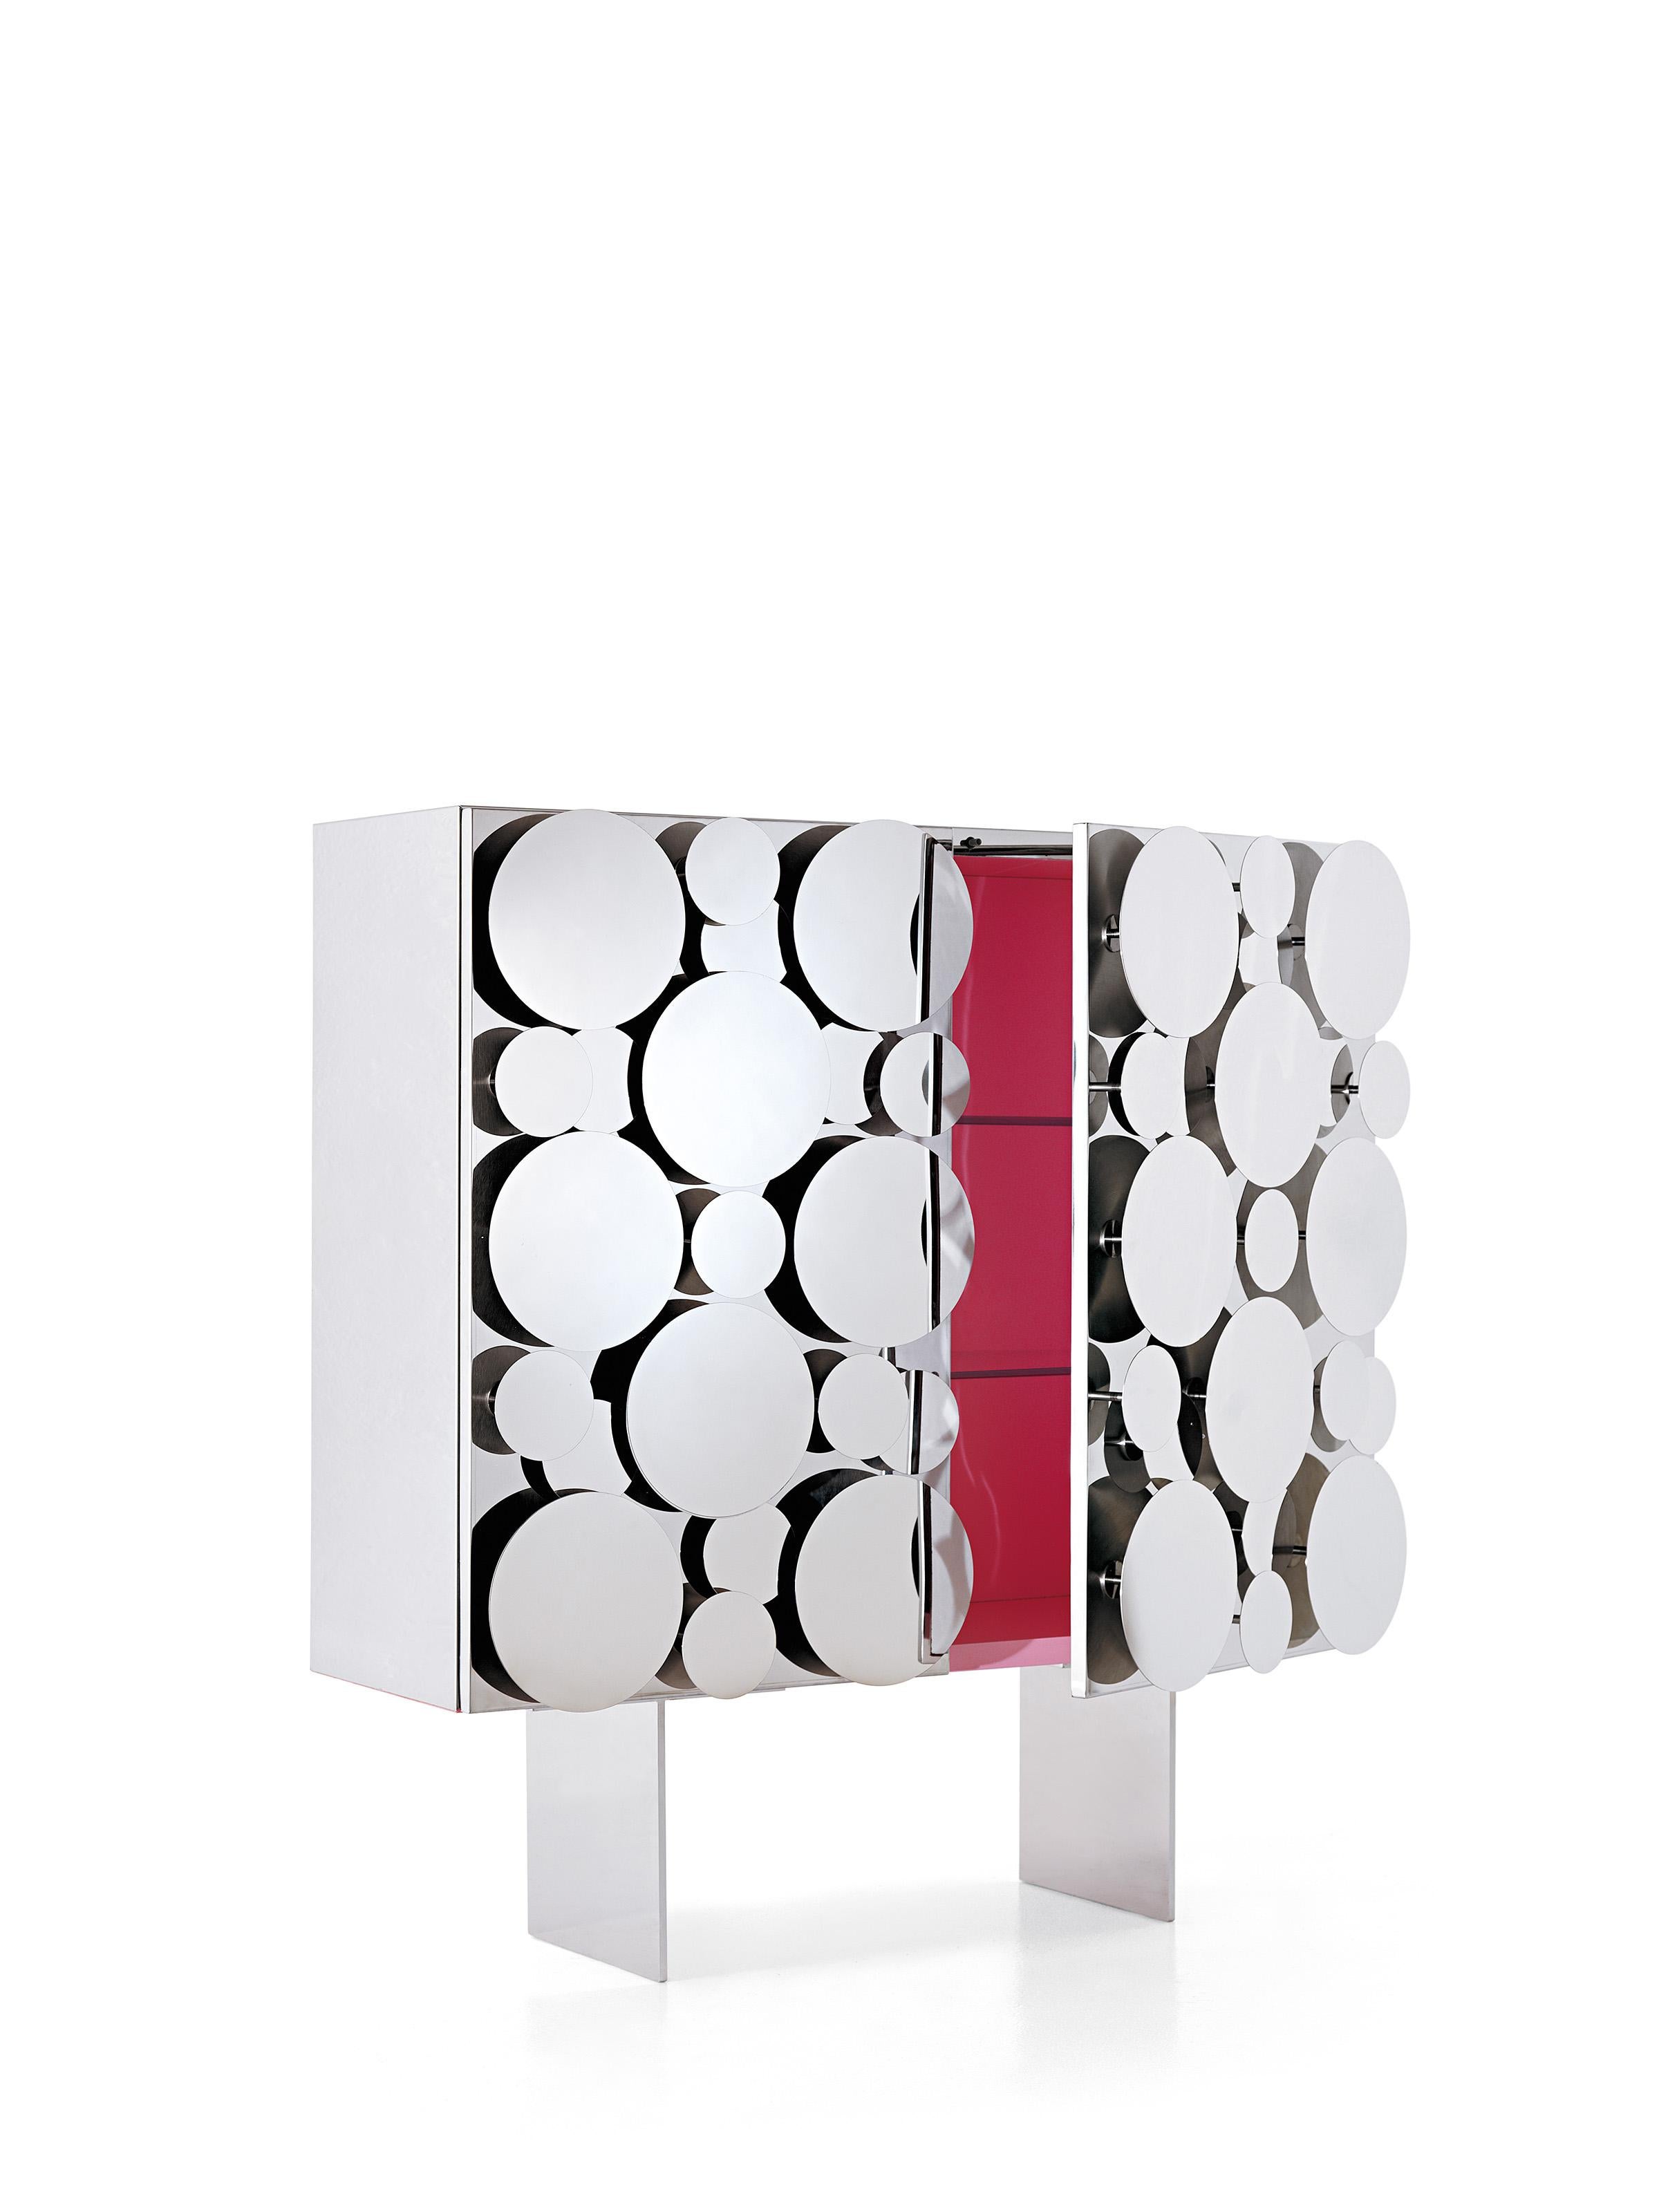 It is the different meaning given to the term Gagà in Italian and in French, the two languages he loves, that designer Maurizio Galante reflected upon in conceiving his Gagà, the collection that includes two sideboards, characterized by surfaces